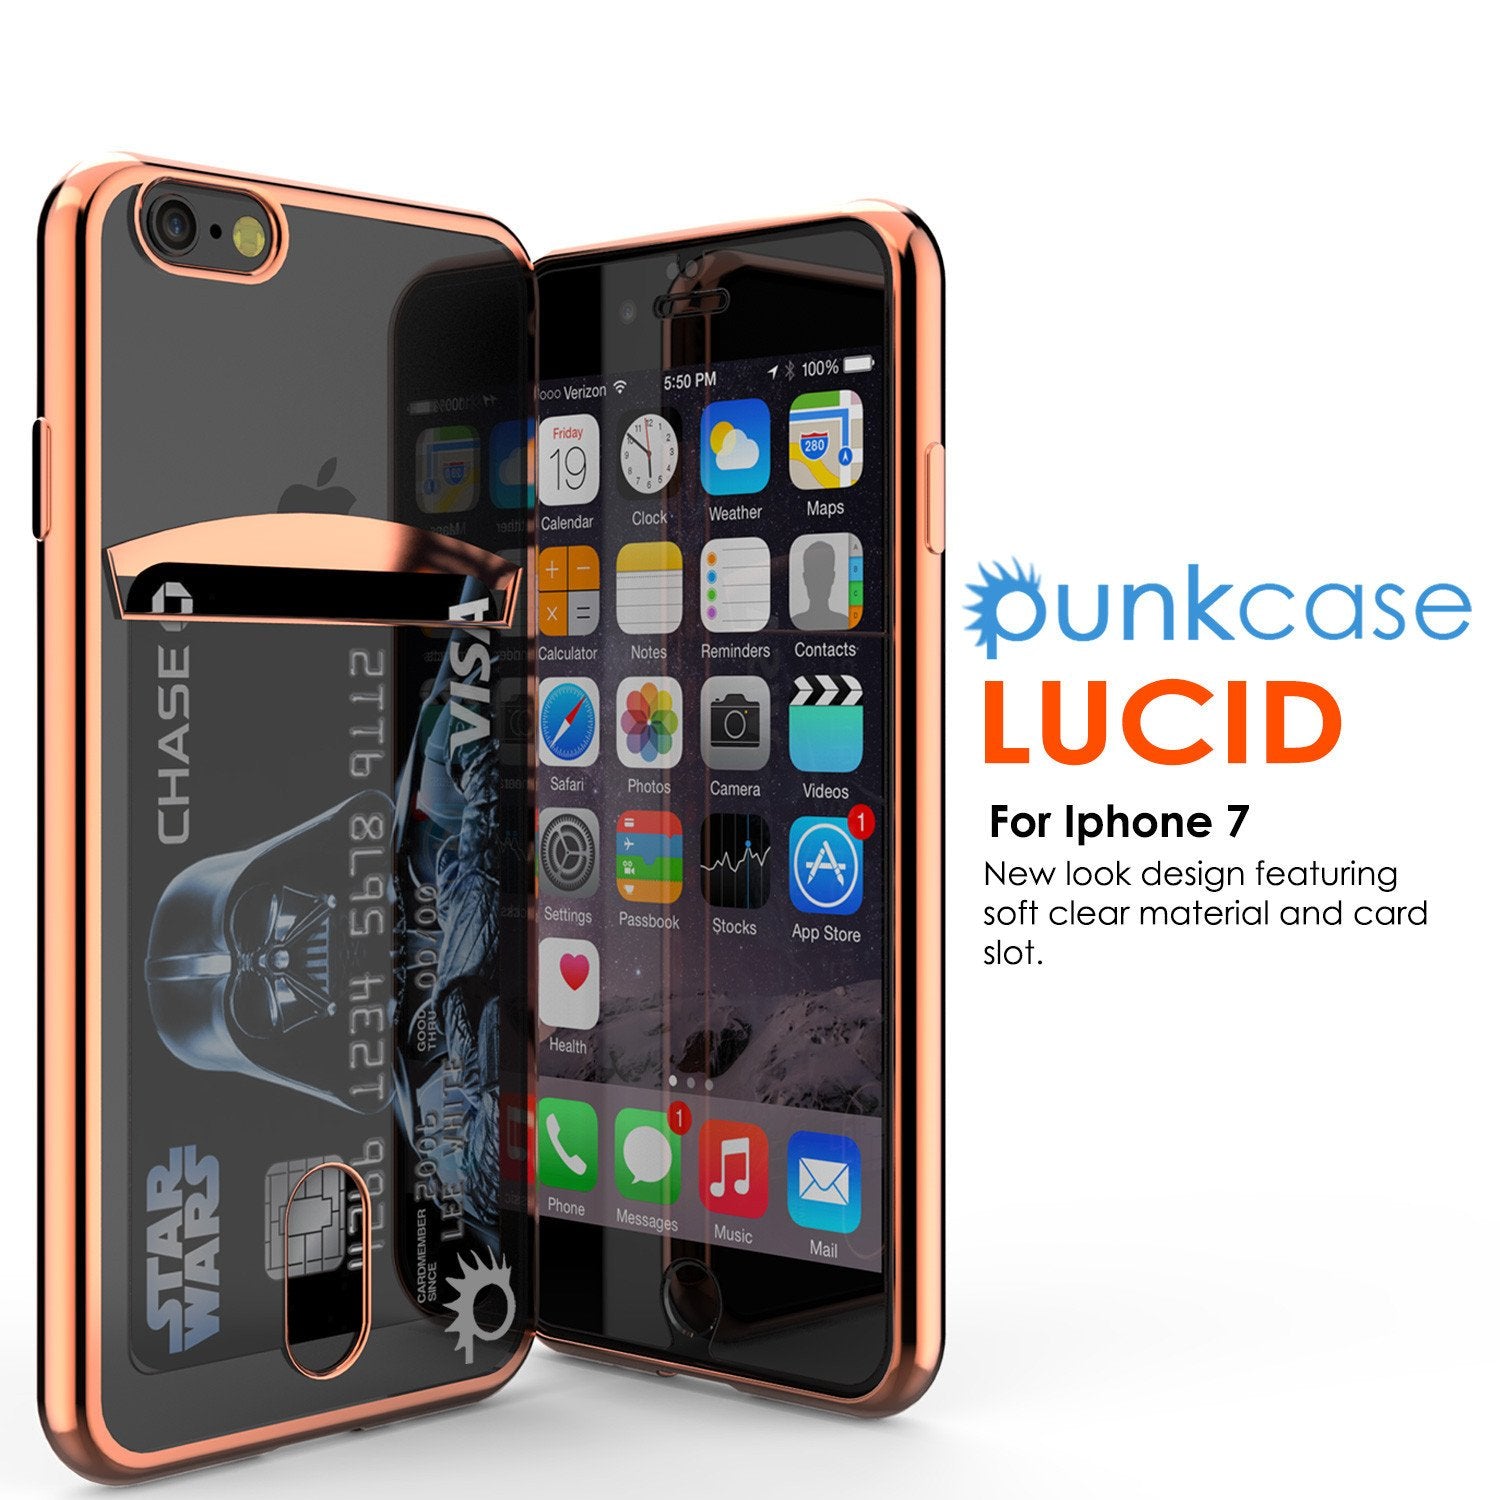 iPhone 7 Case, PUNKCASE® LUCID Rose Gold Series for iPhone 7 Premium Impact Protective Armor Case Cover | Clear TPU | Lifetime Warranty Exchange | PUNK SHIELD Screen Protector | Ultra Fit